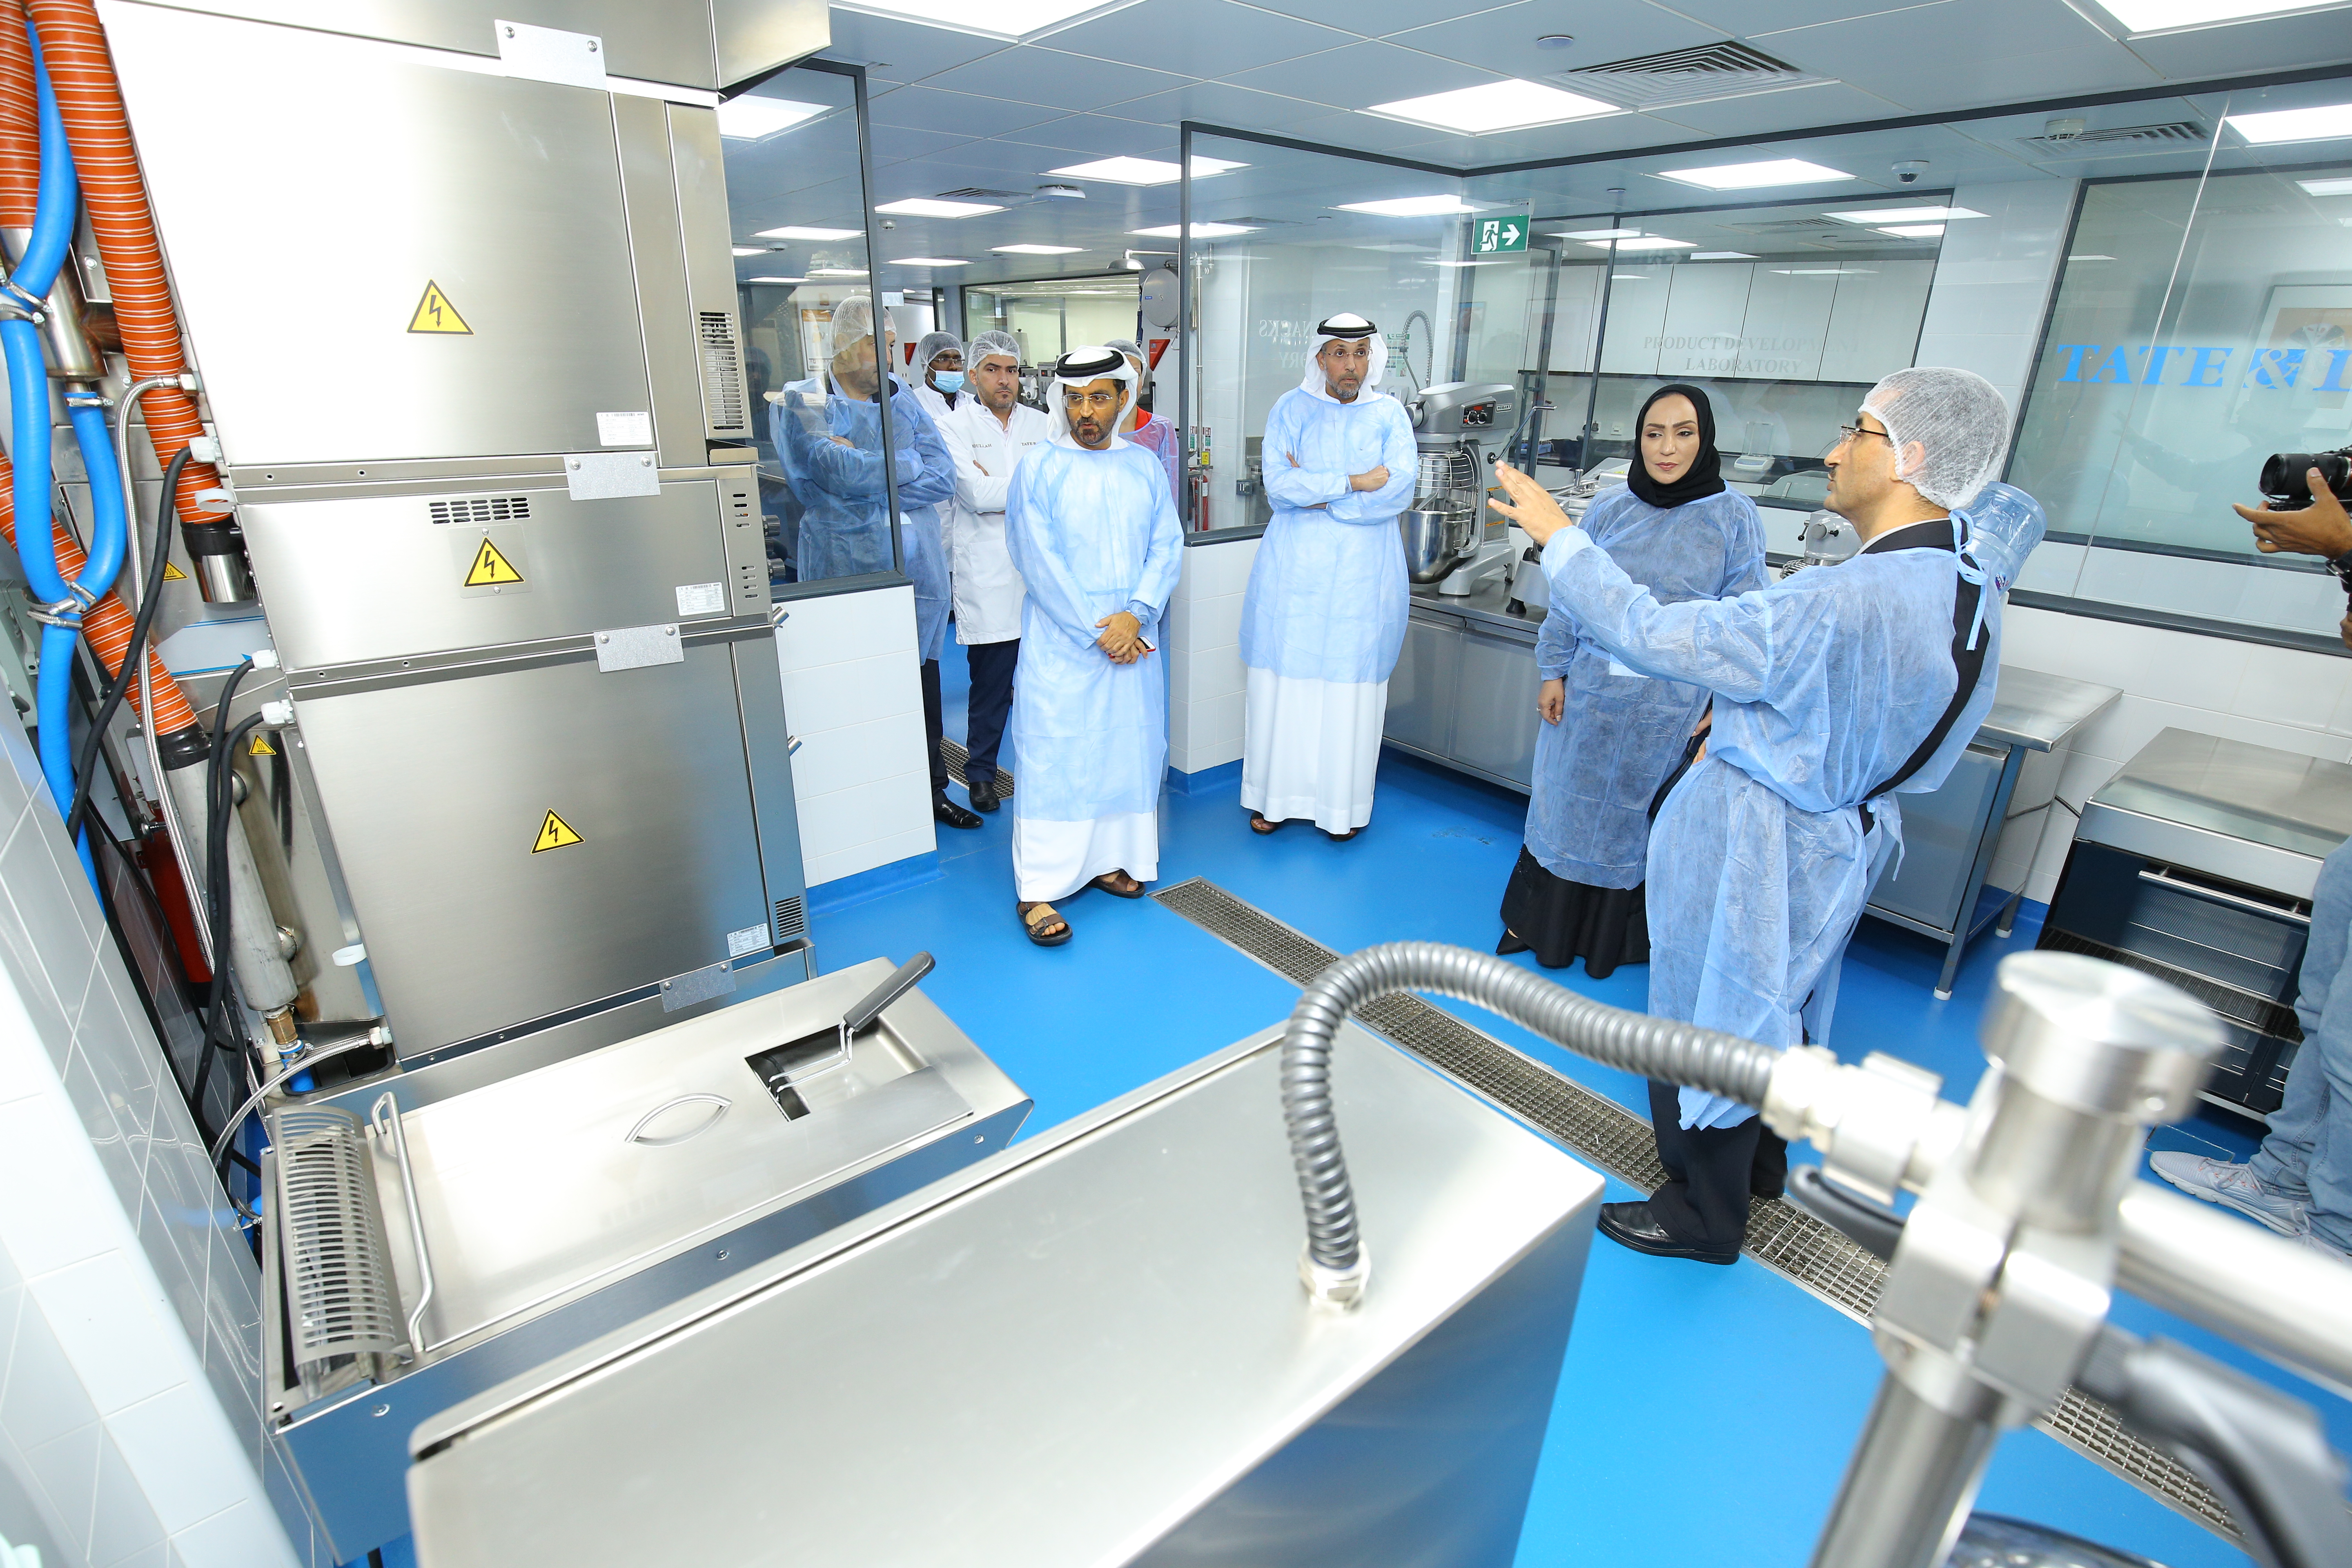 Ministry of Industry and Advanced Technology Concludes Region’s First Sugar Reduction Program